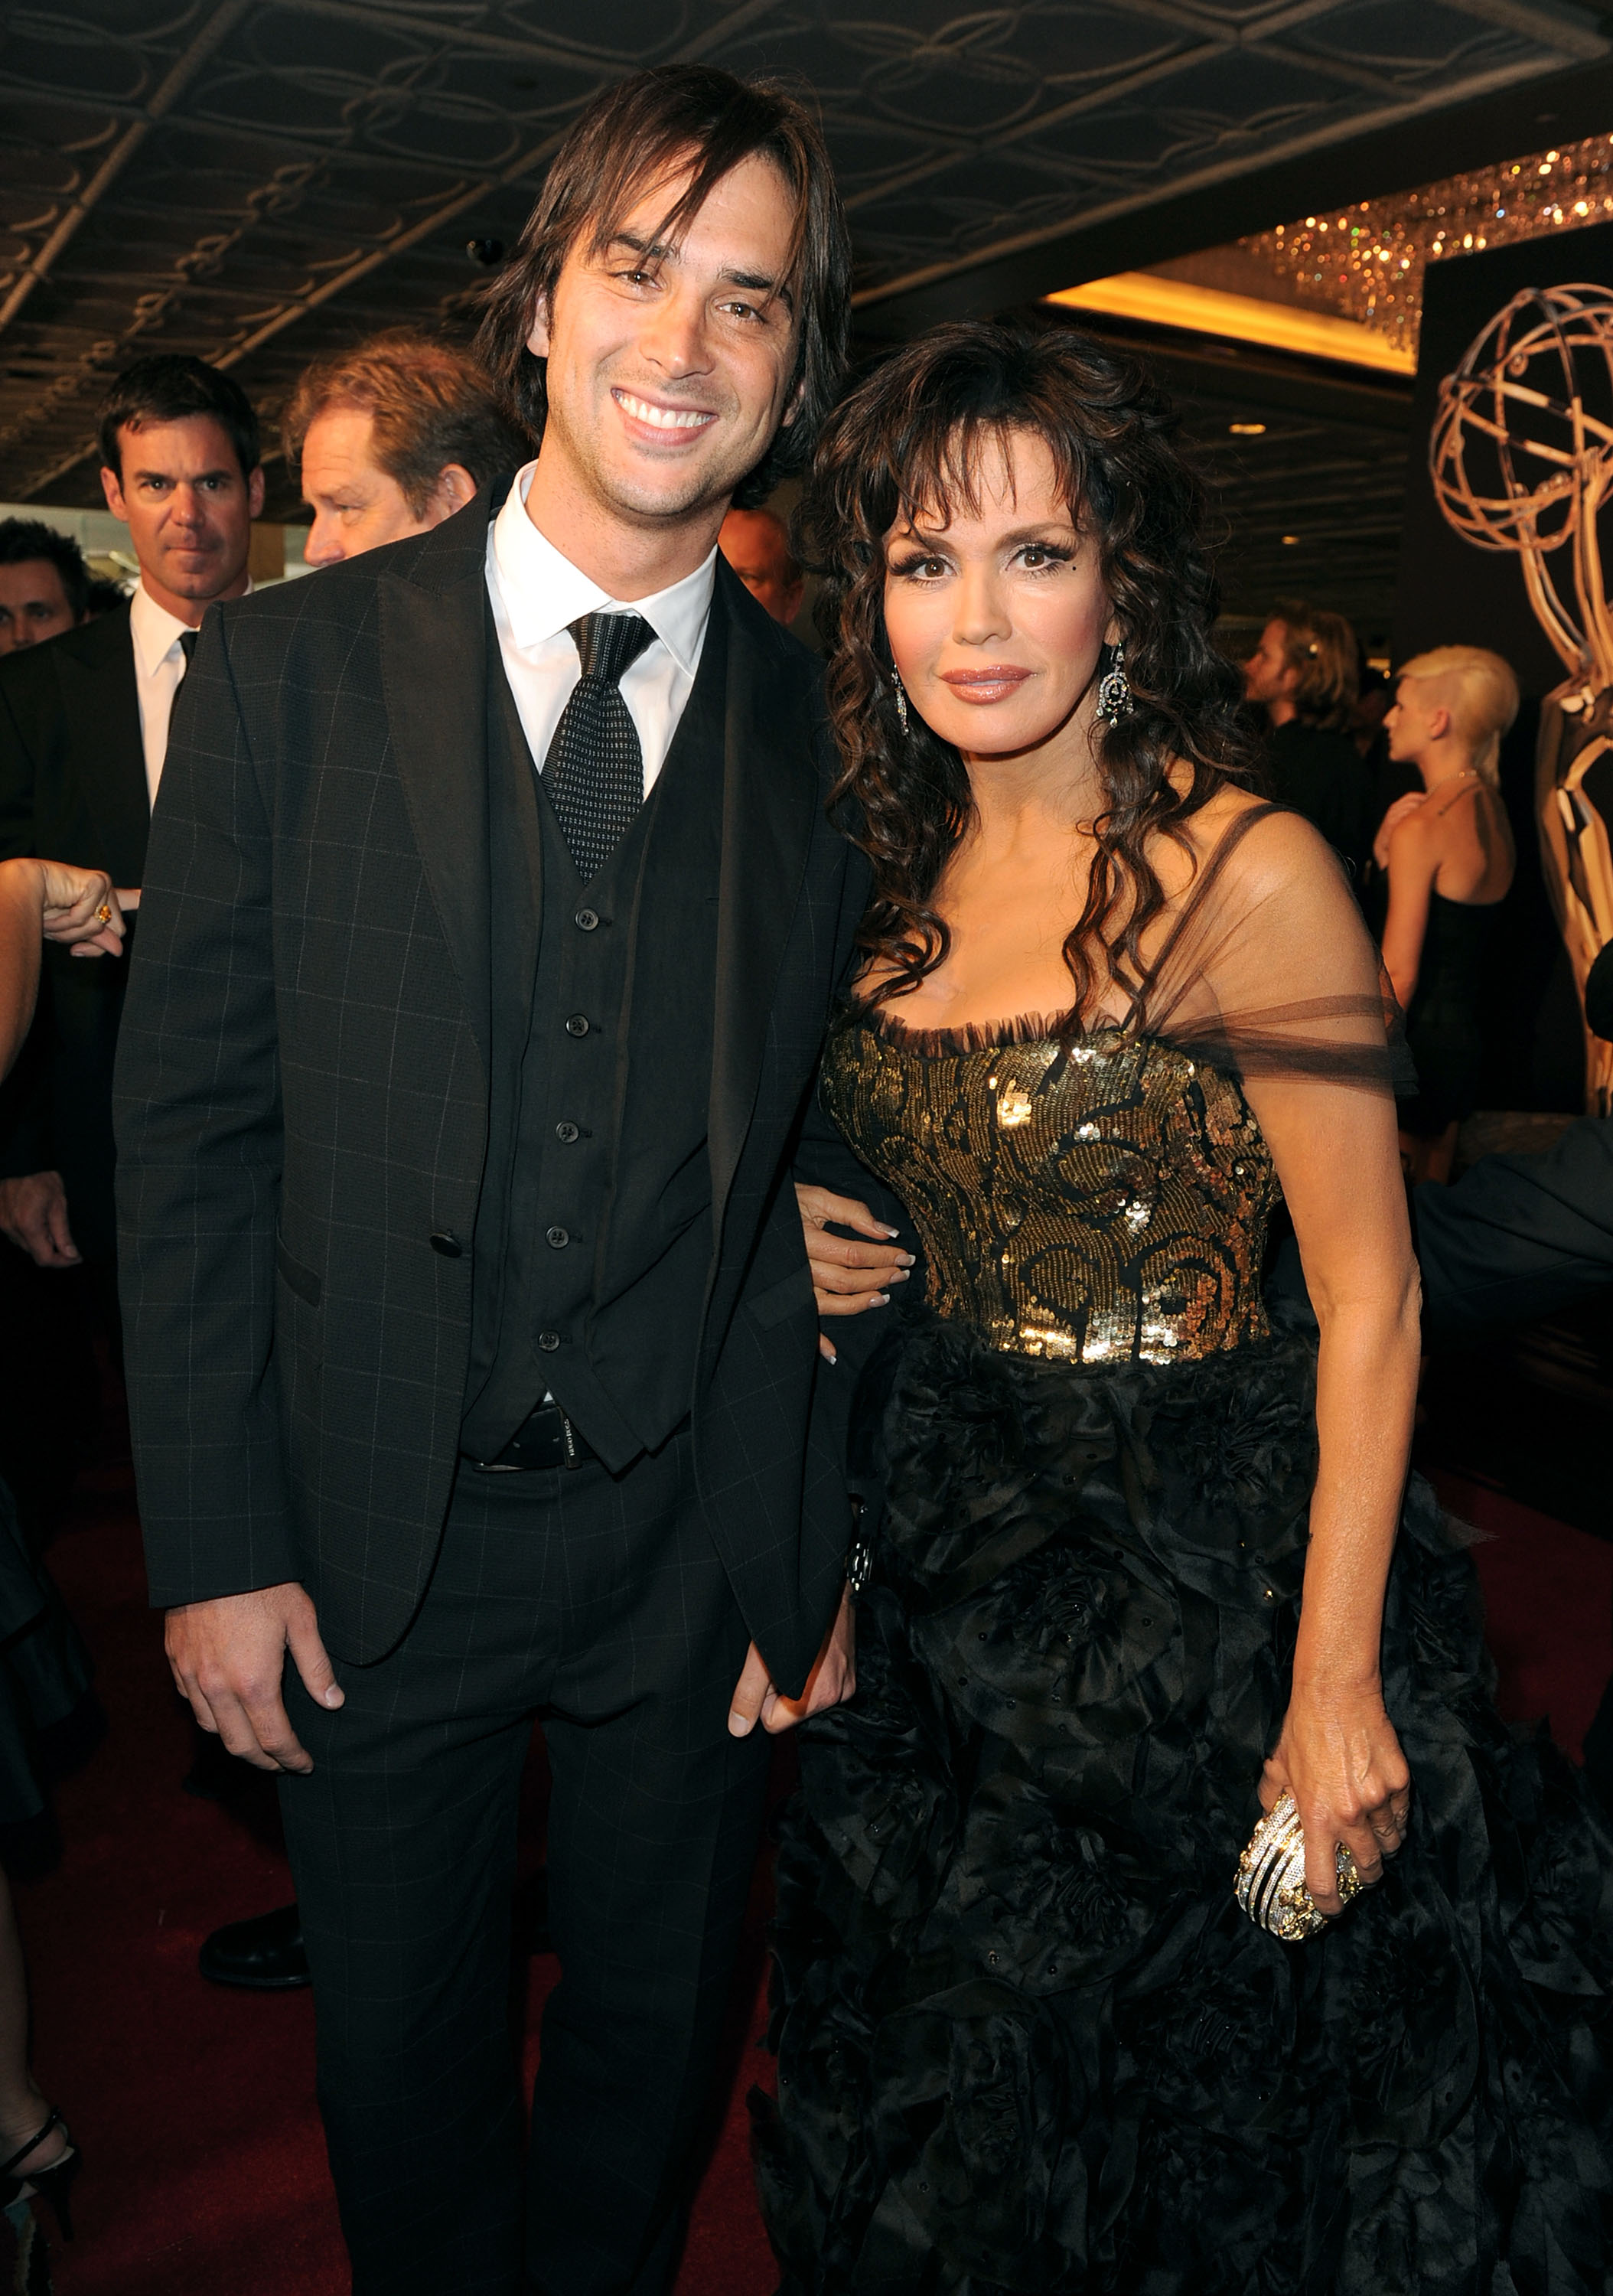 Marie Osmond and her son Stephen in Las Vegas in 2010 | Source: Getty Images